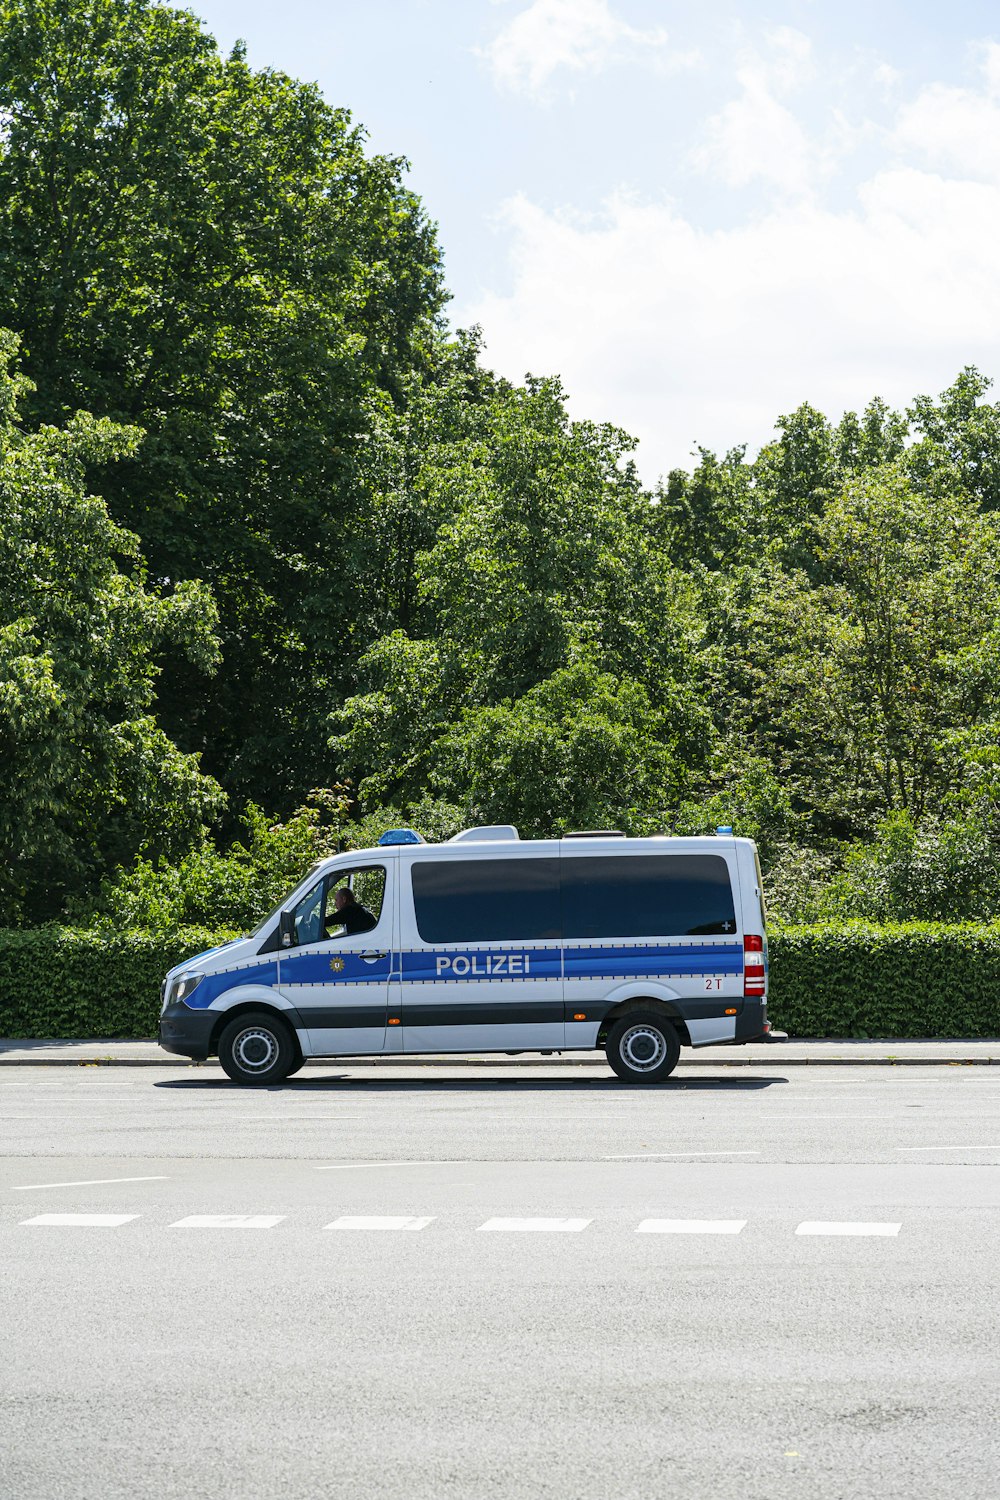 blue and white van on road near green trees during daytime